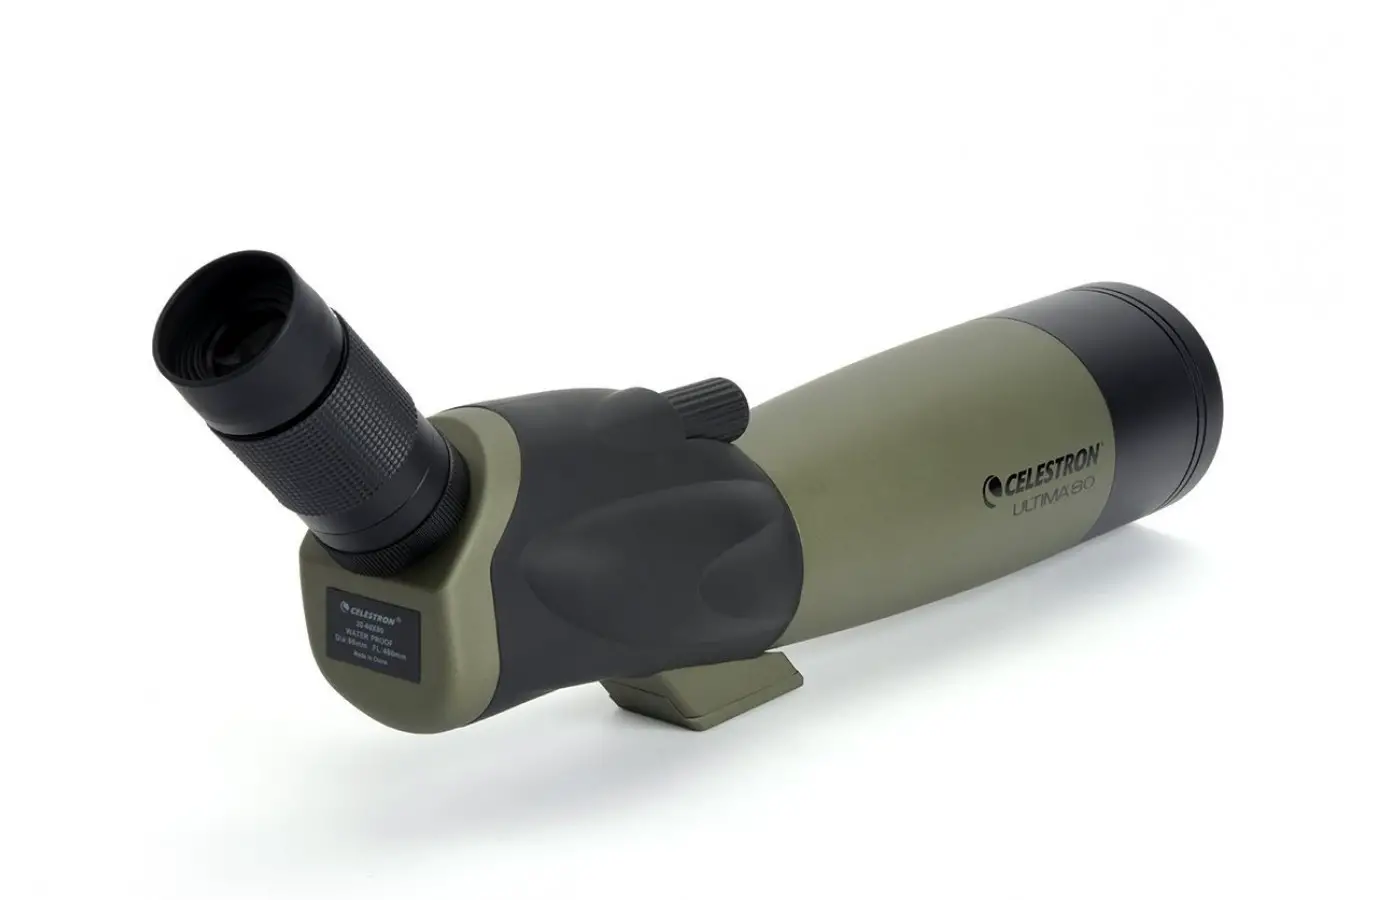 The Celestron Ultima 80 offers 80 mm refractor spotting. 